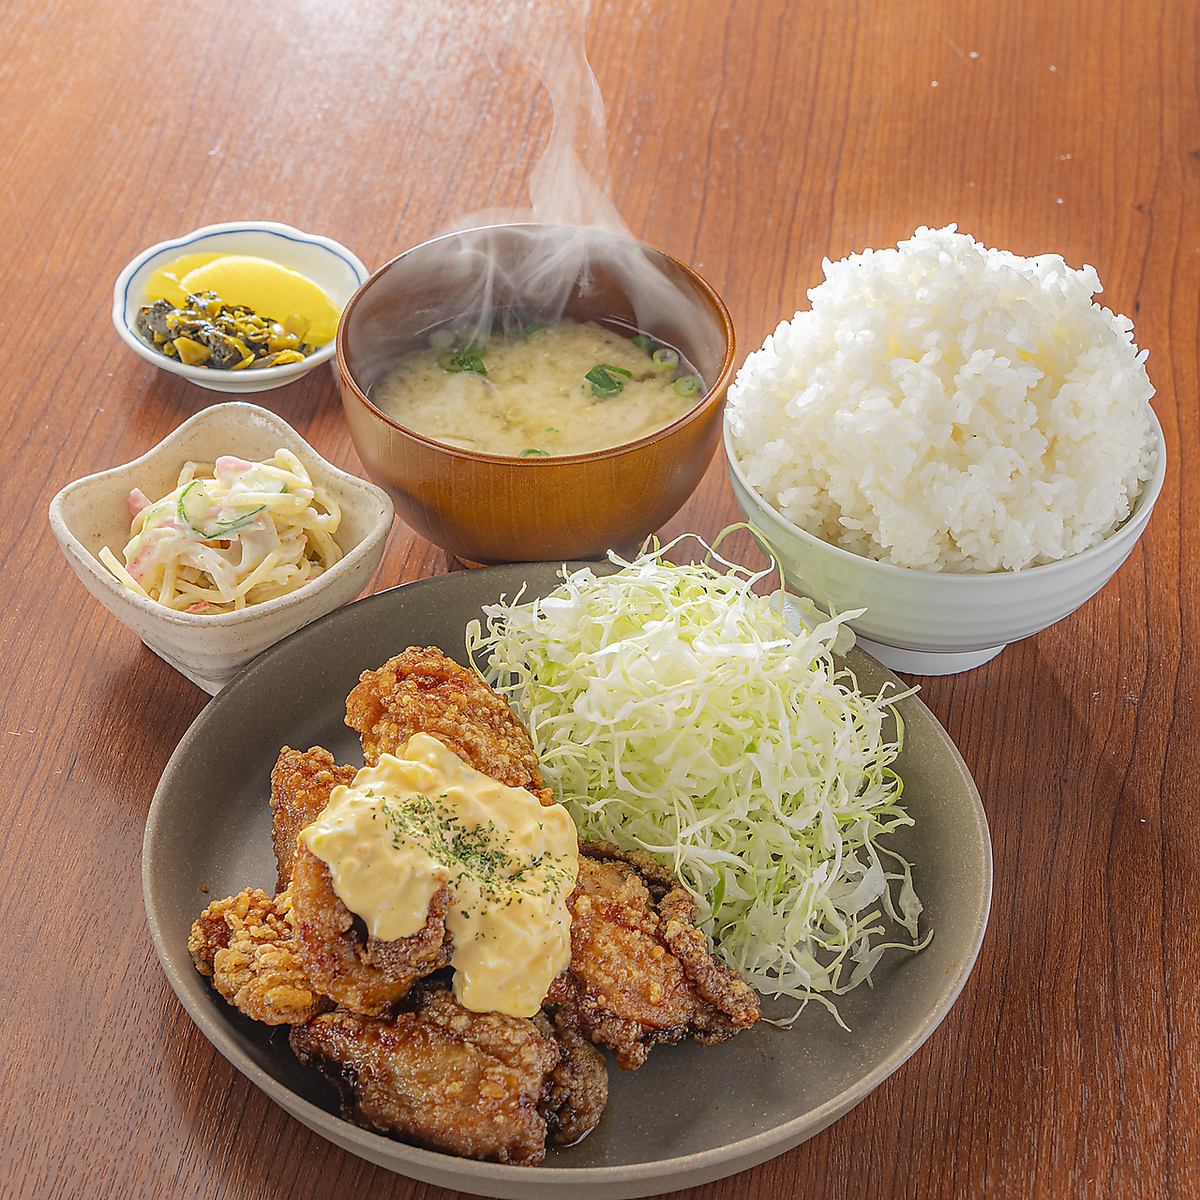 Full of nutrition! Enjoy a well-balanced set meal★